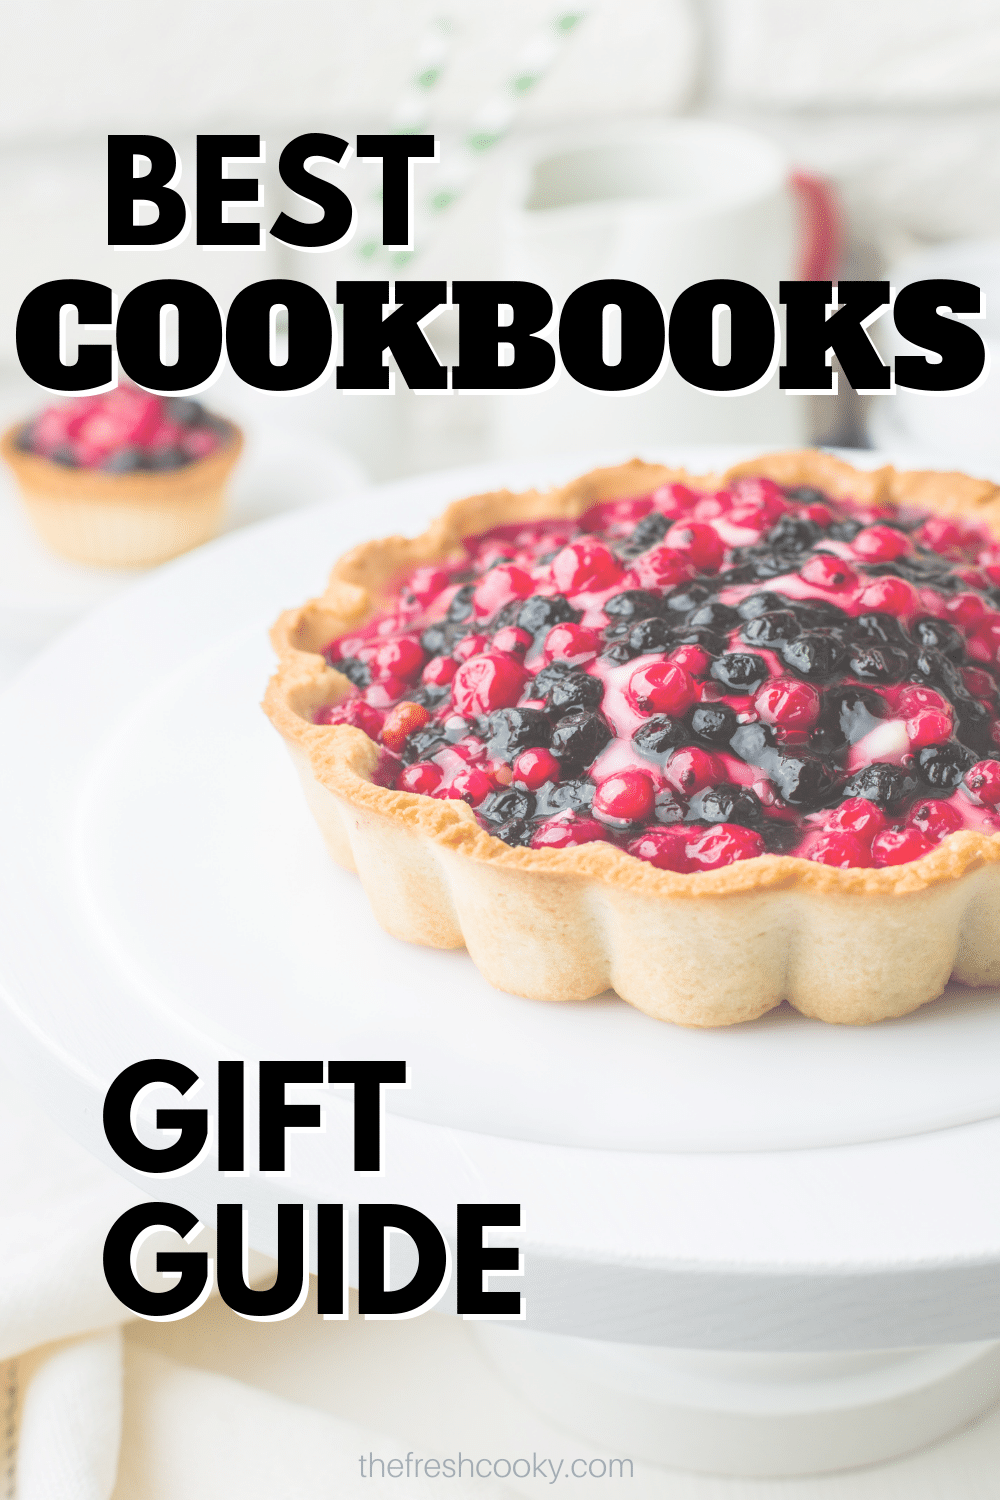 Best cookbooks gift guide pin with image of fruit tart on the counter.